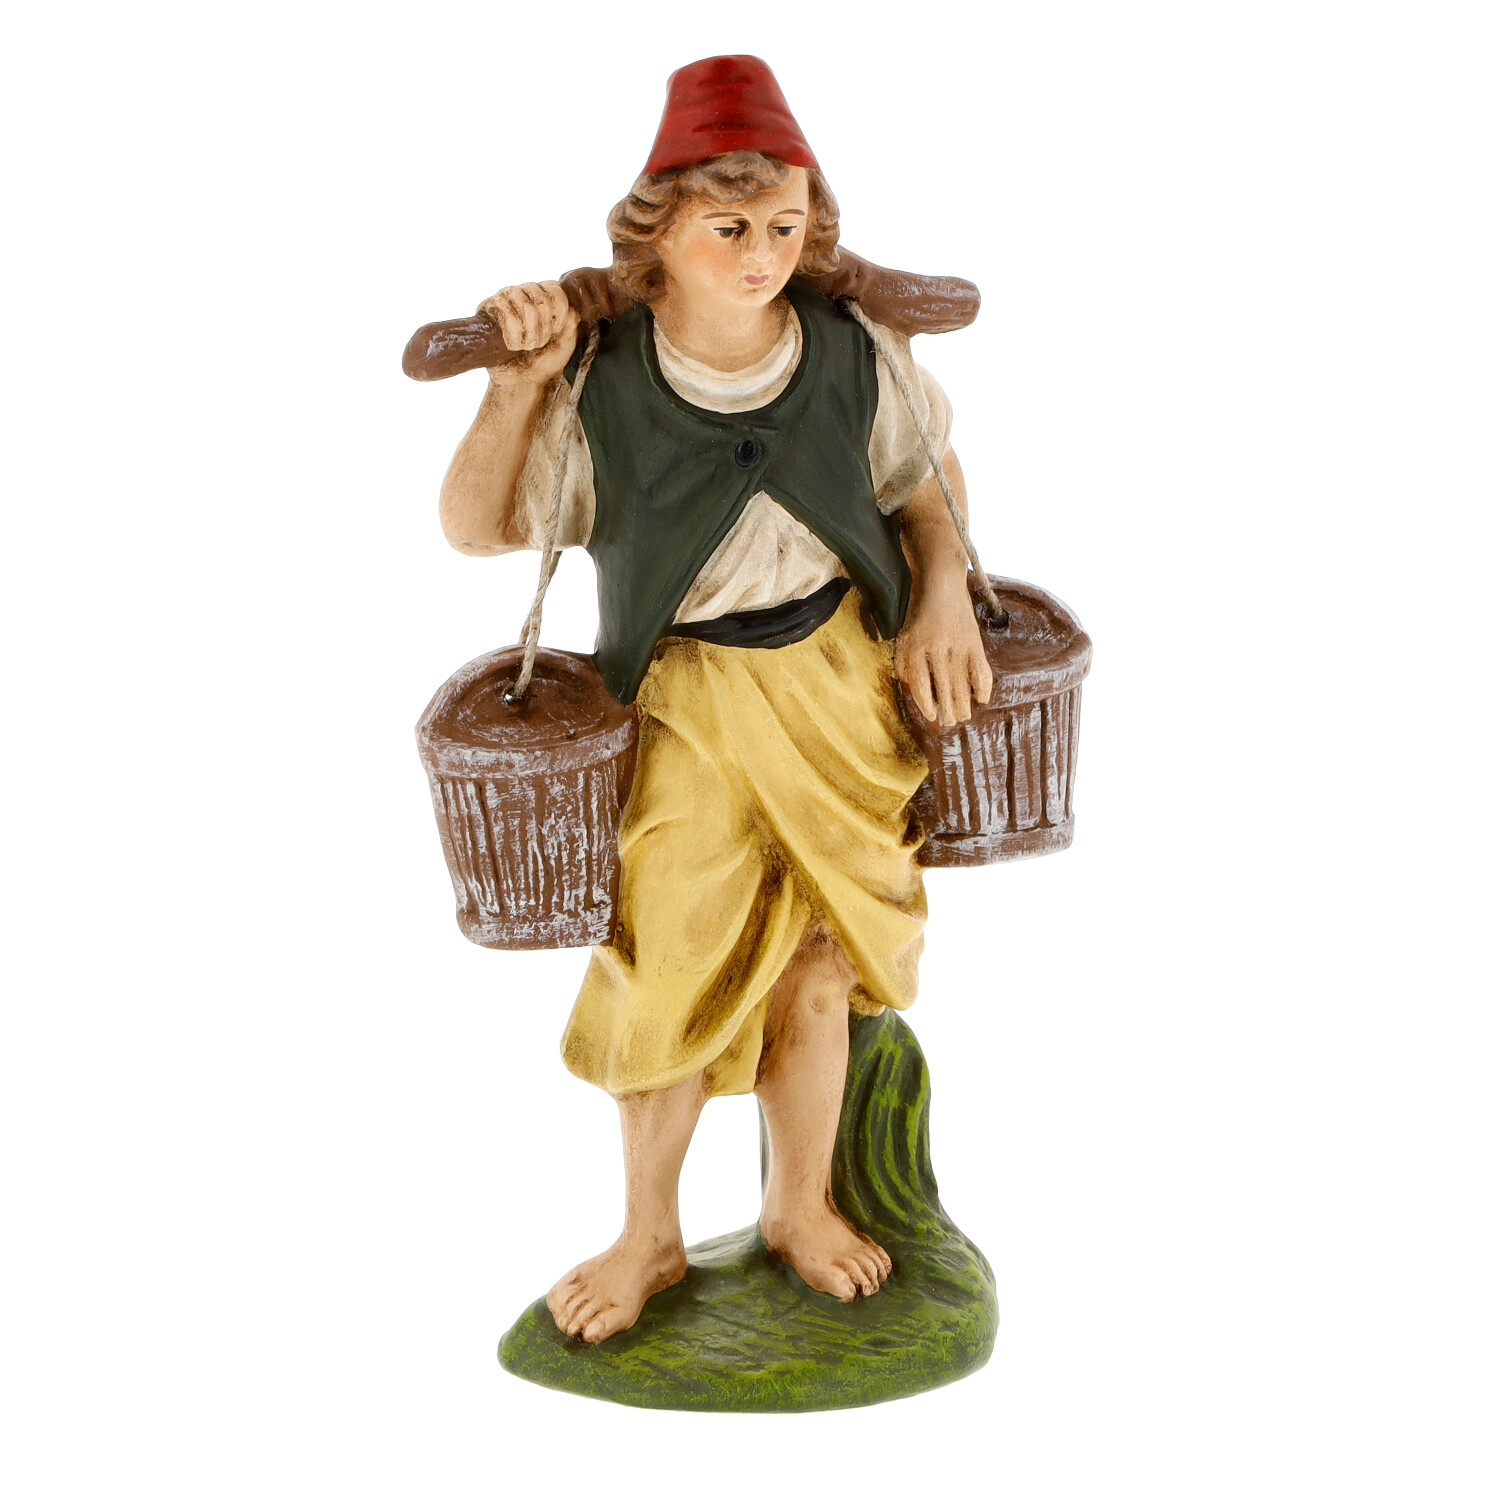 Water carrier with jugs - Marolin Nativity figure - made in Germany